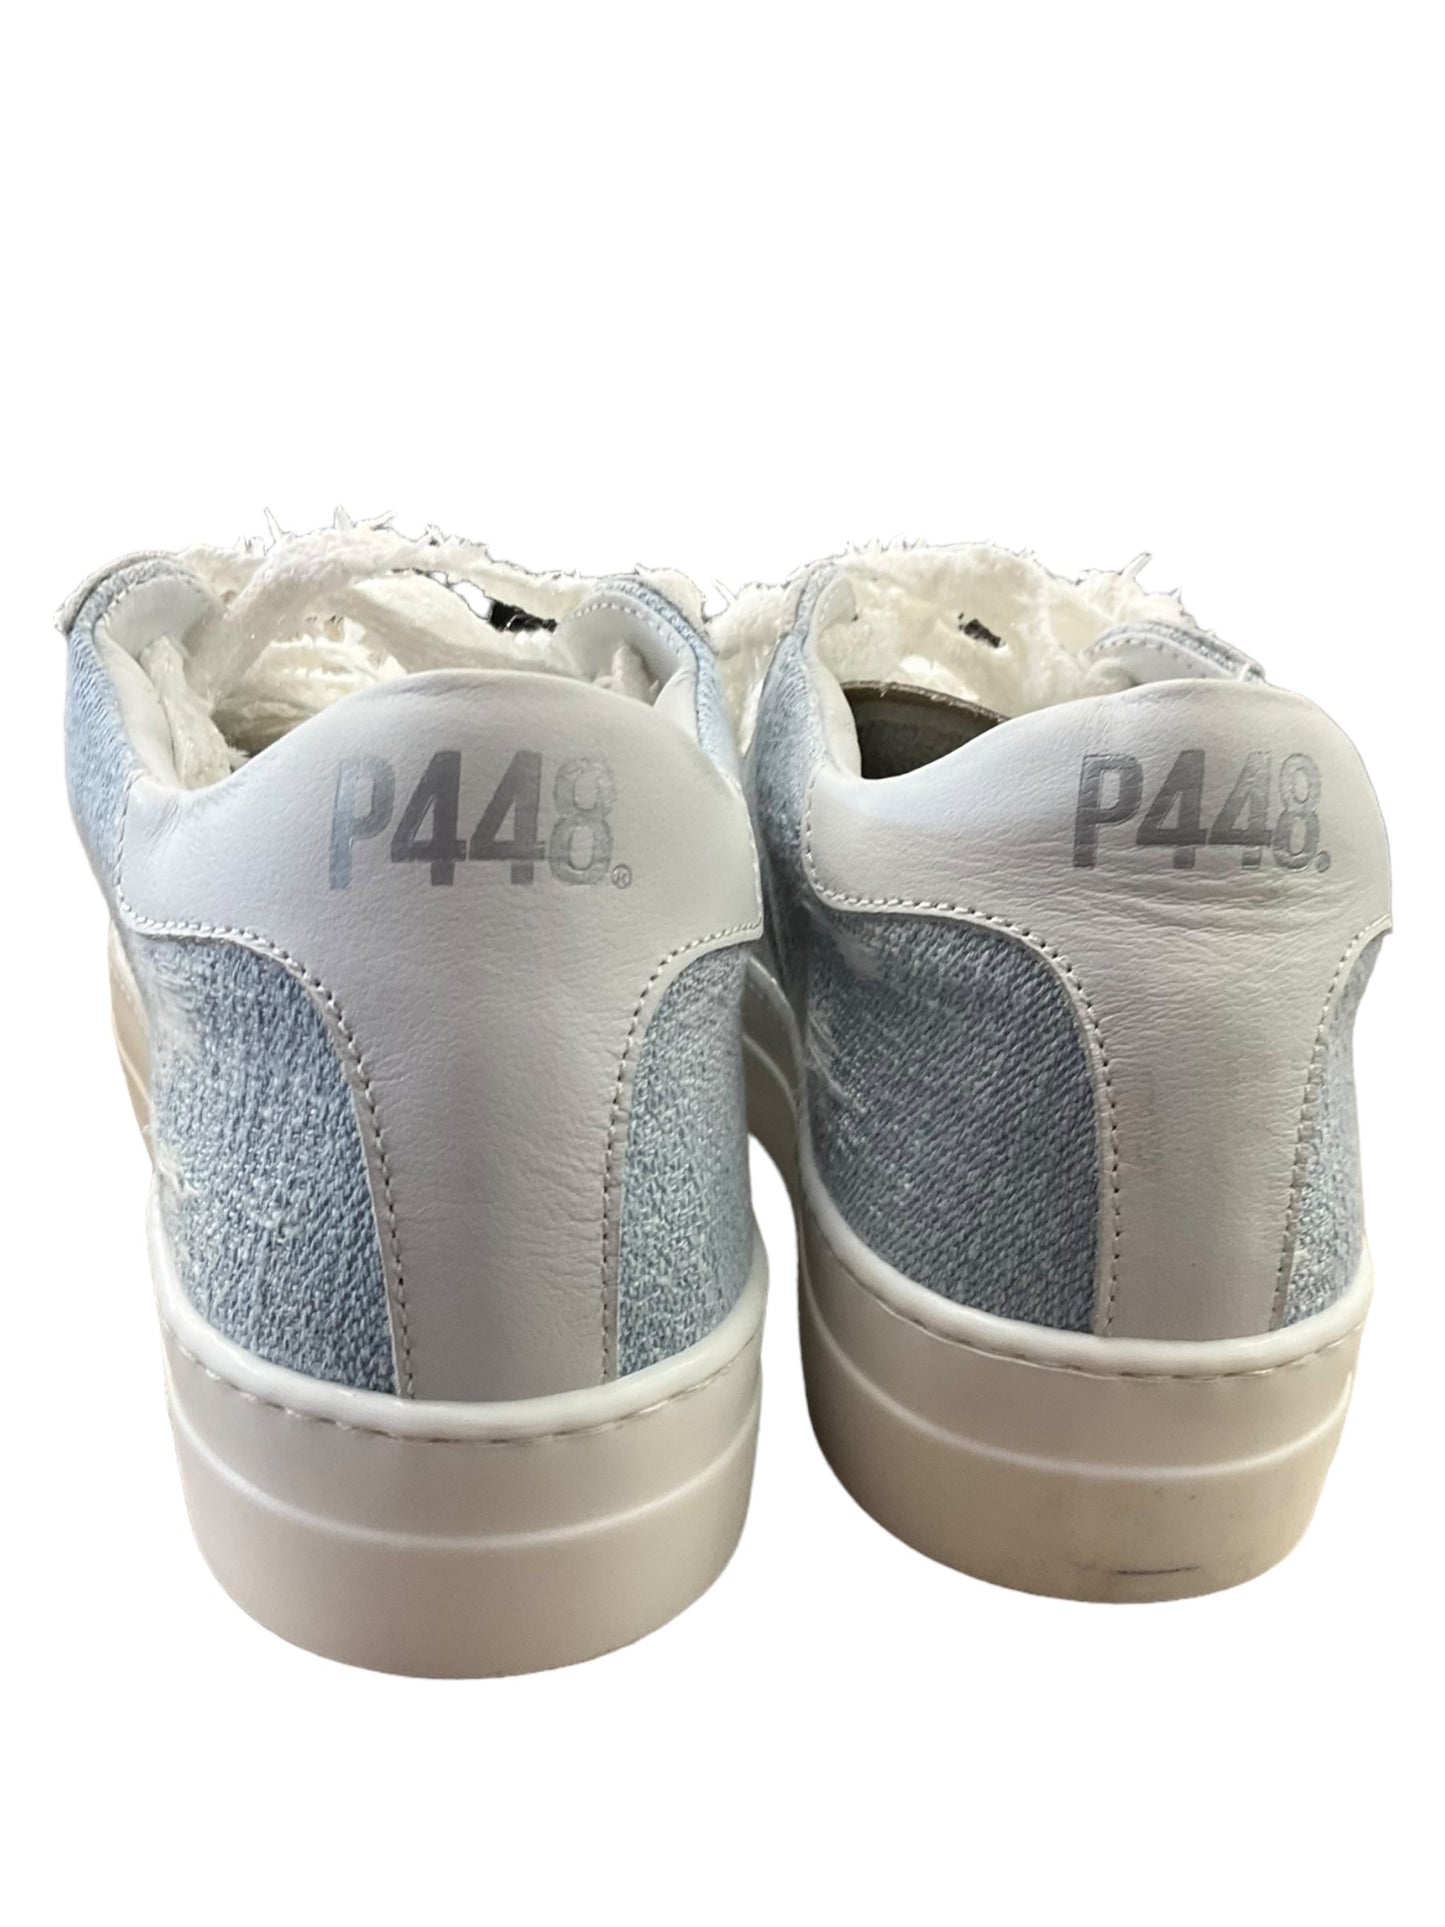 White Shoes Sneakers P448, Size 8